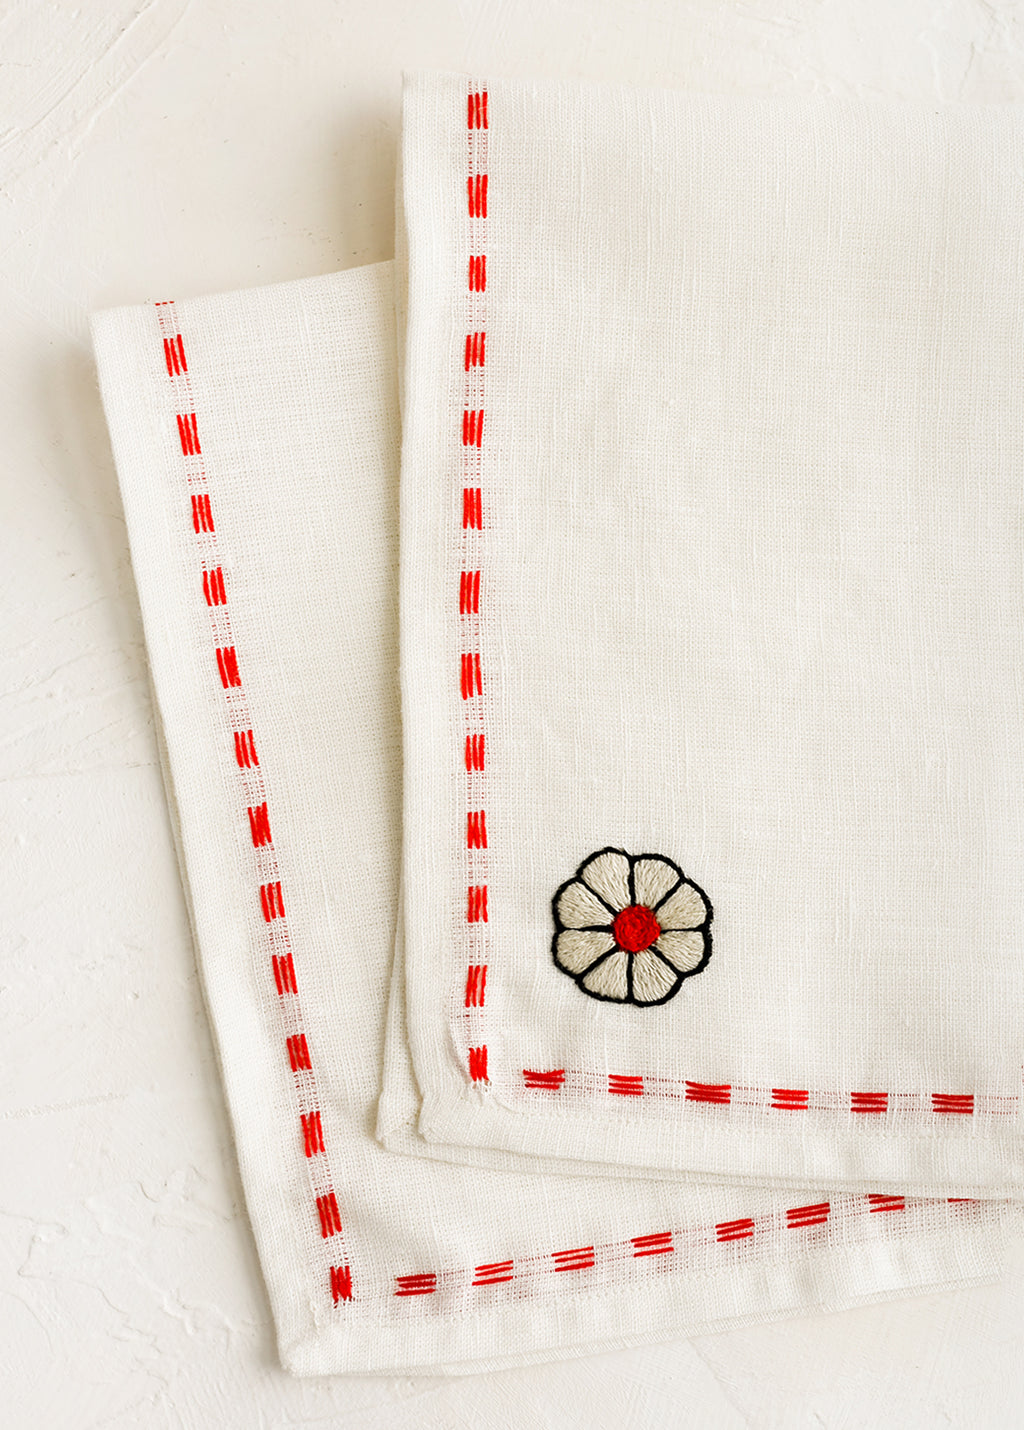 2: A white linen napkin with embroidery detailing in red.